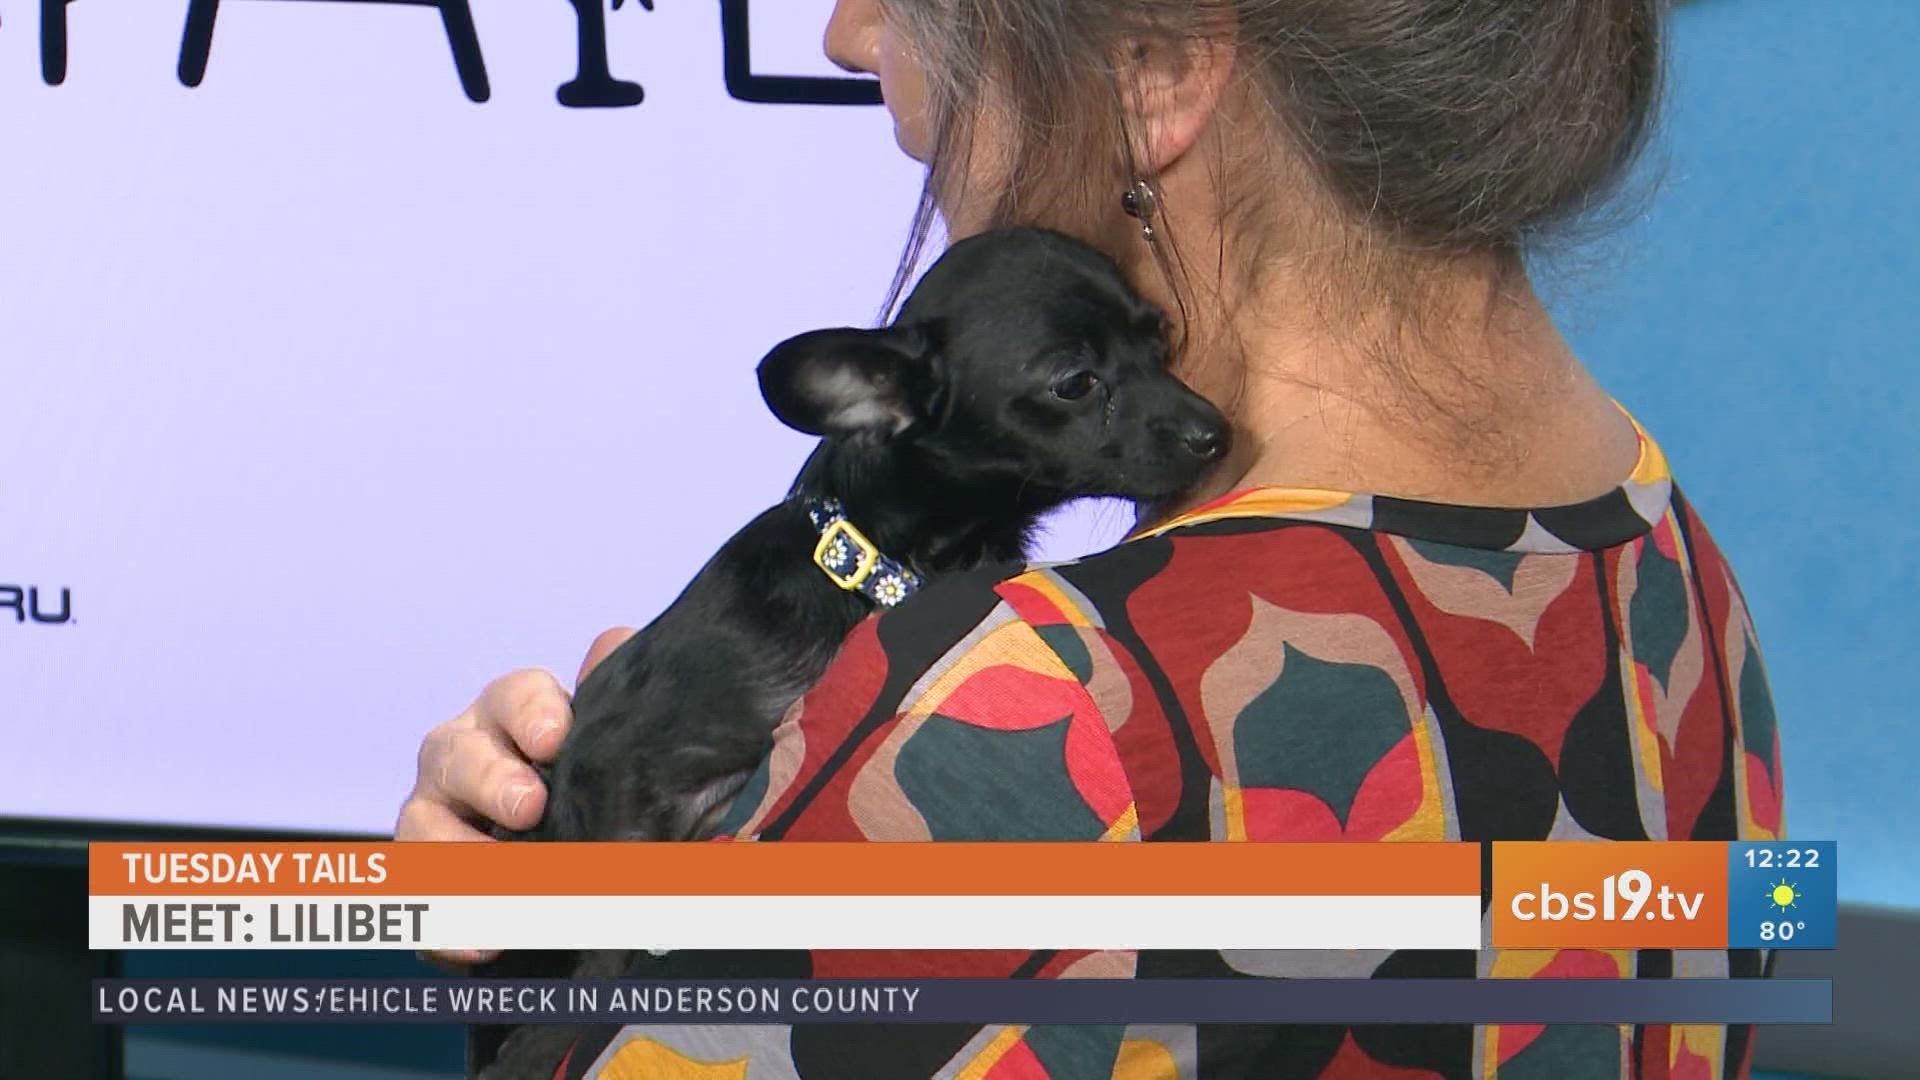 Get to know Lillibet from the SPCA of East Texas